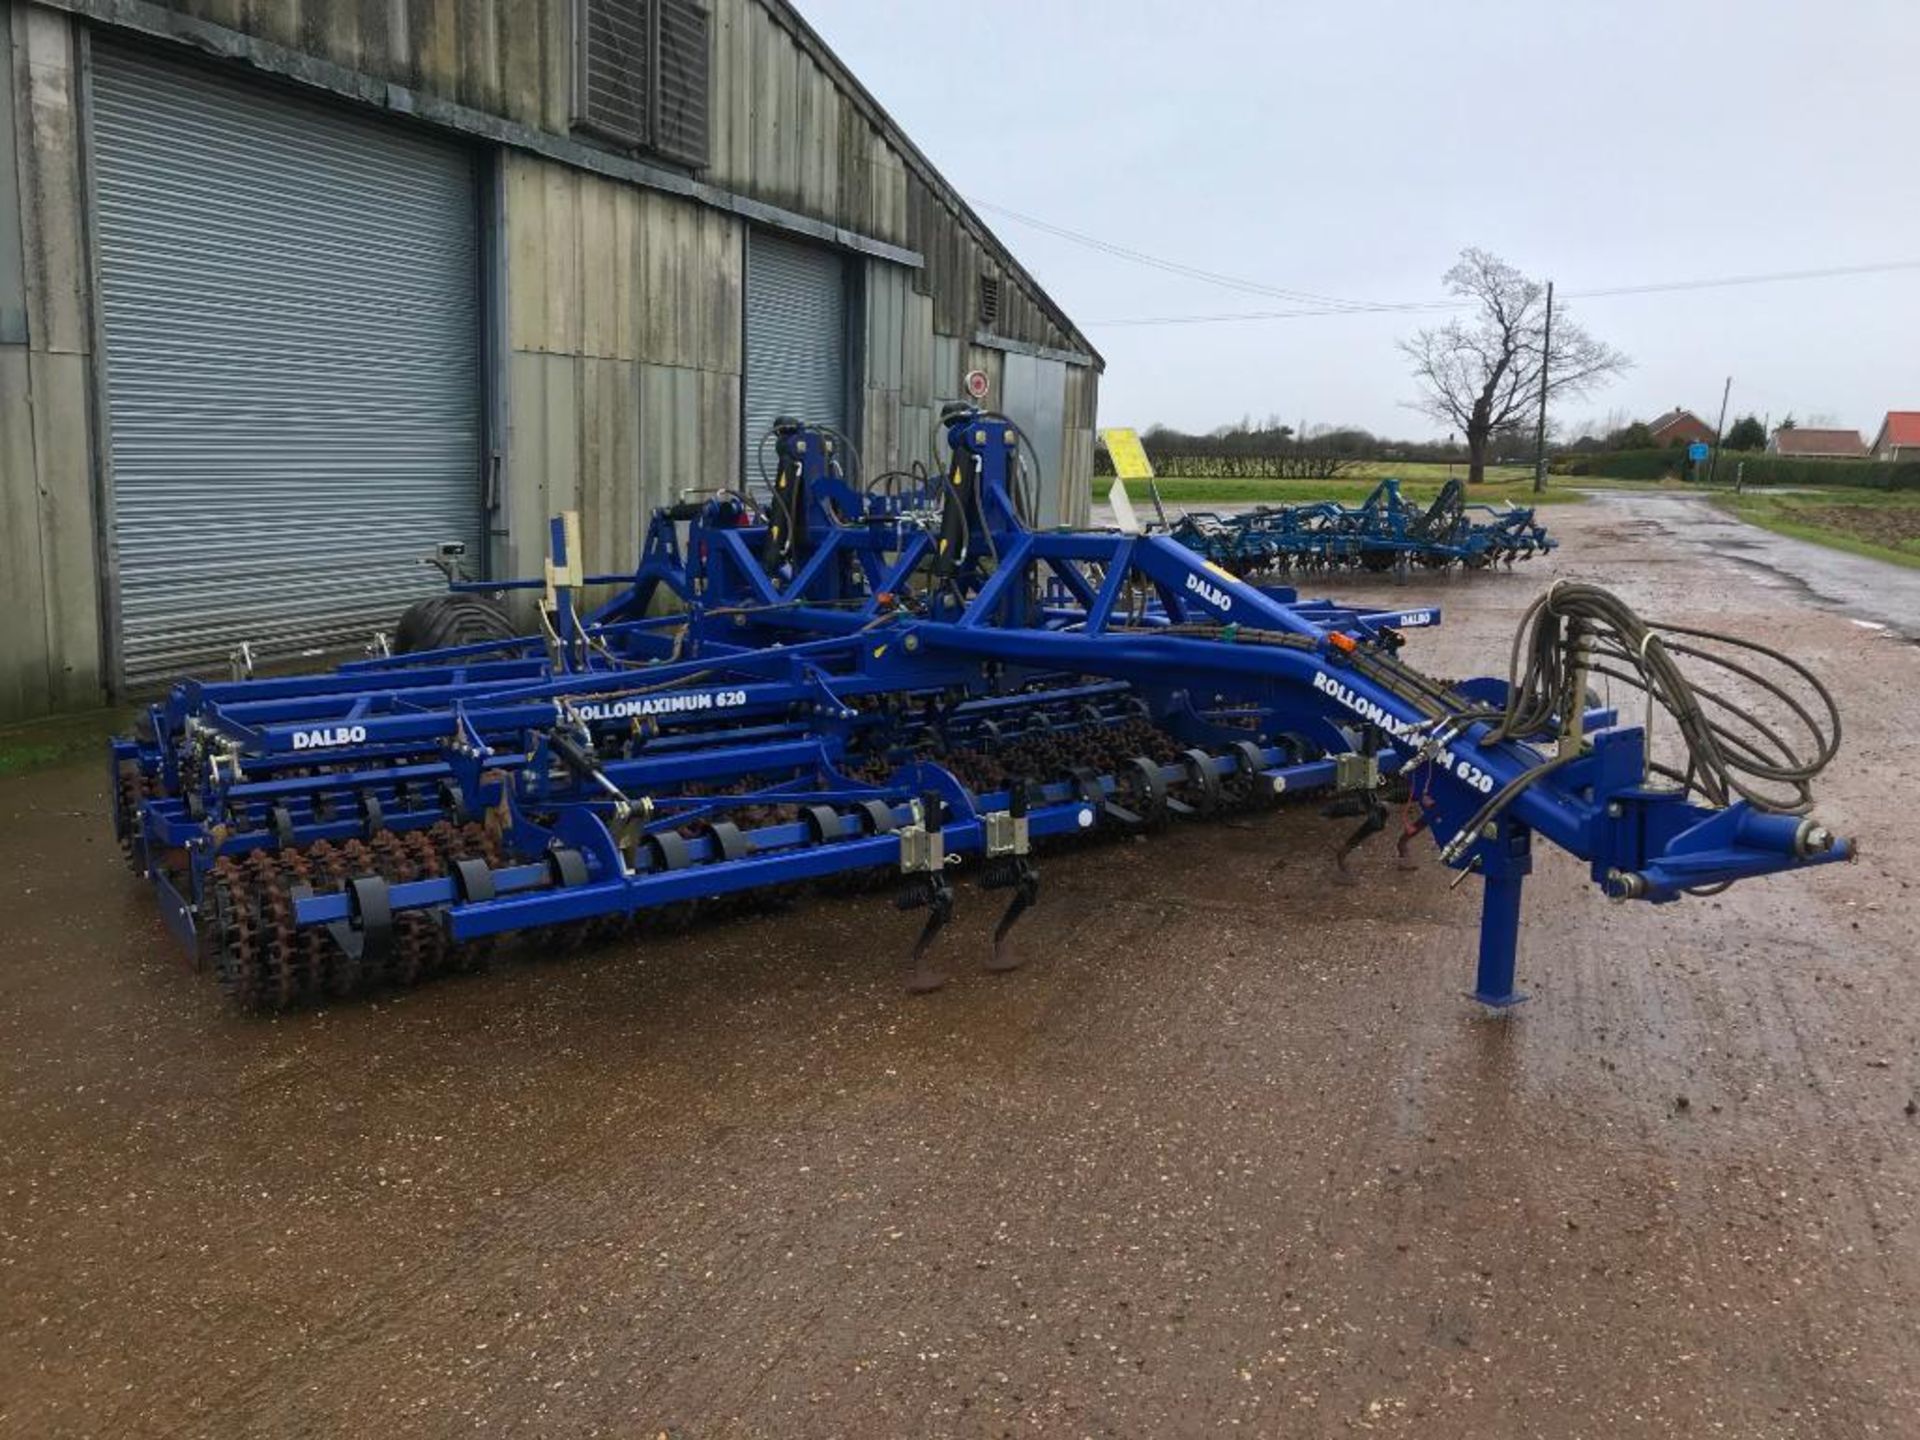 2020 Dalbo Rollomaximum 620 6.2m seed bed cultivator, front and rear rollers, levelling boards, hydr - Image 3 of 10